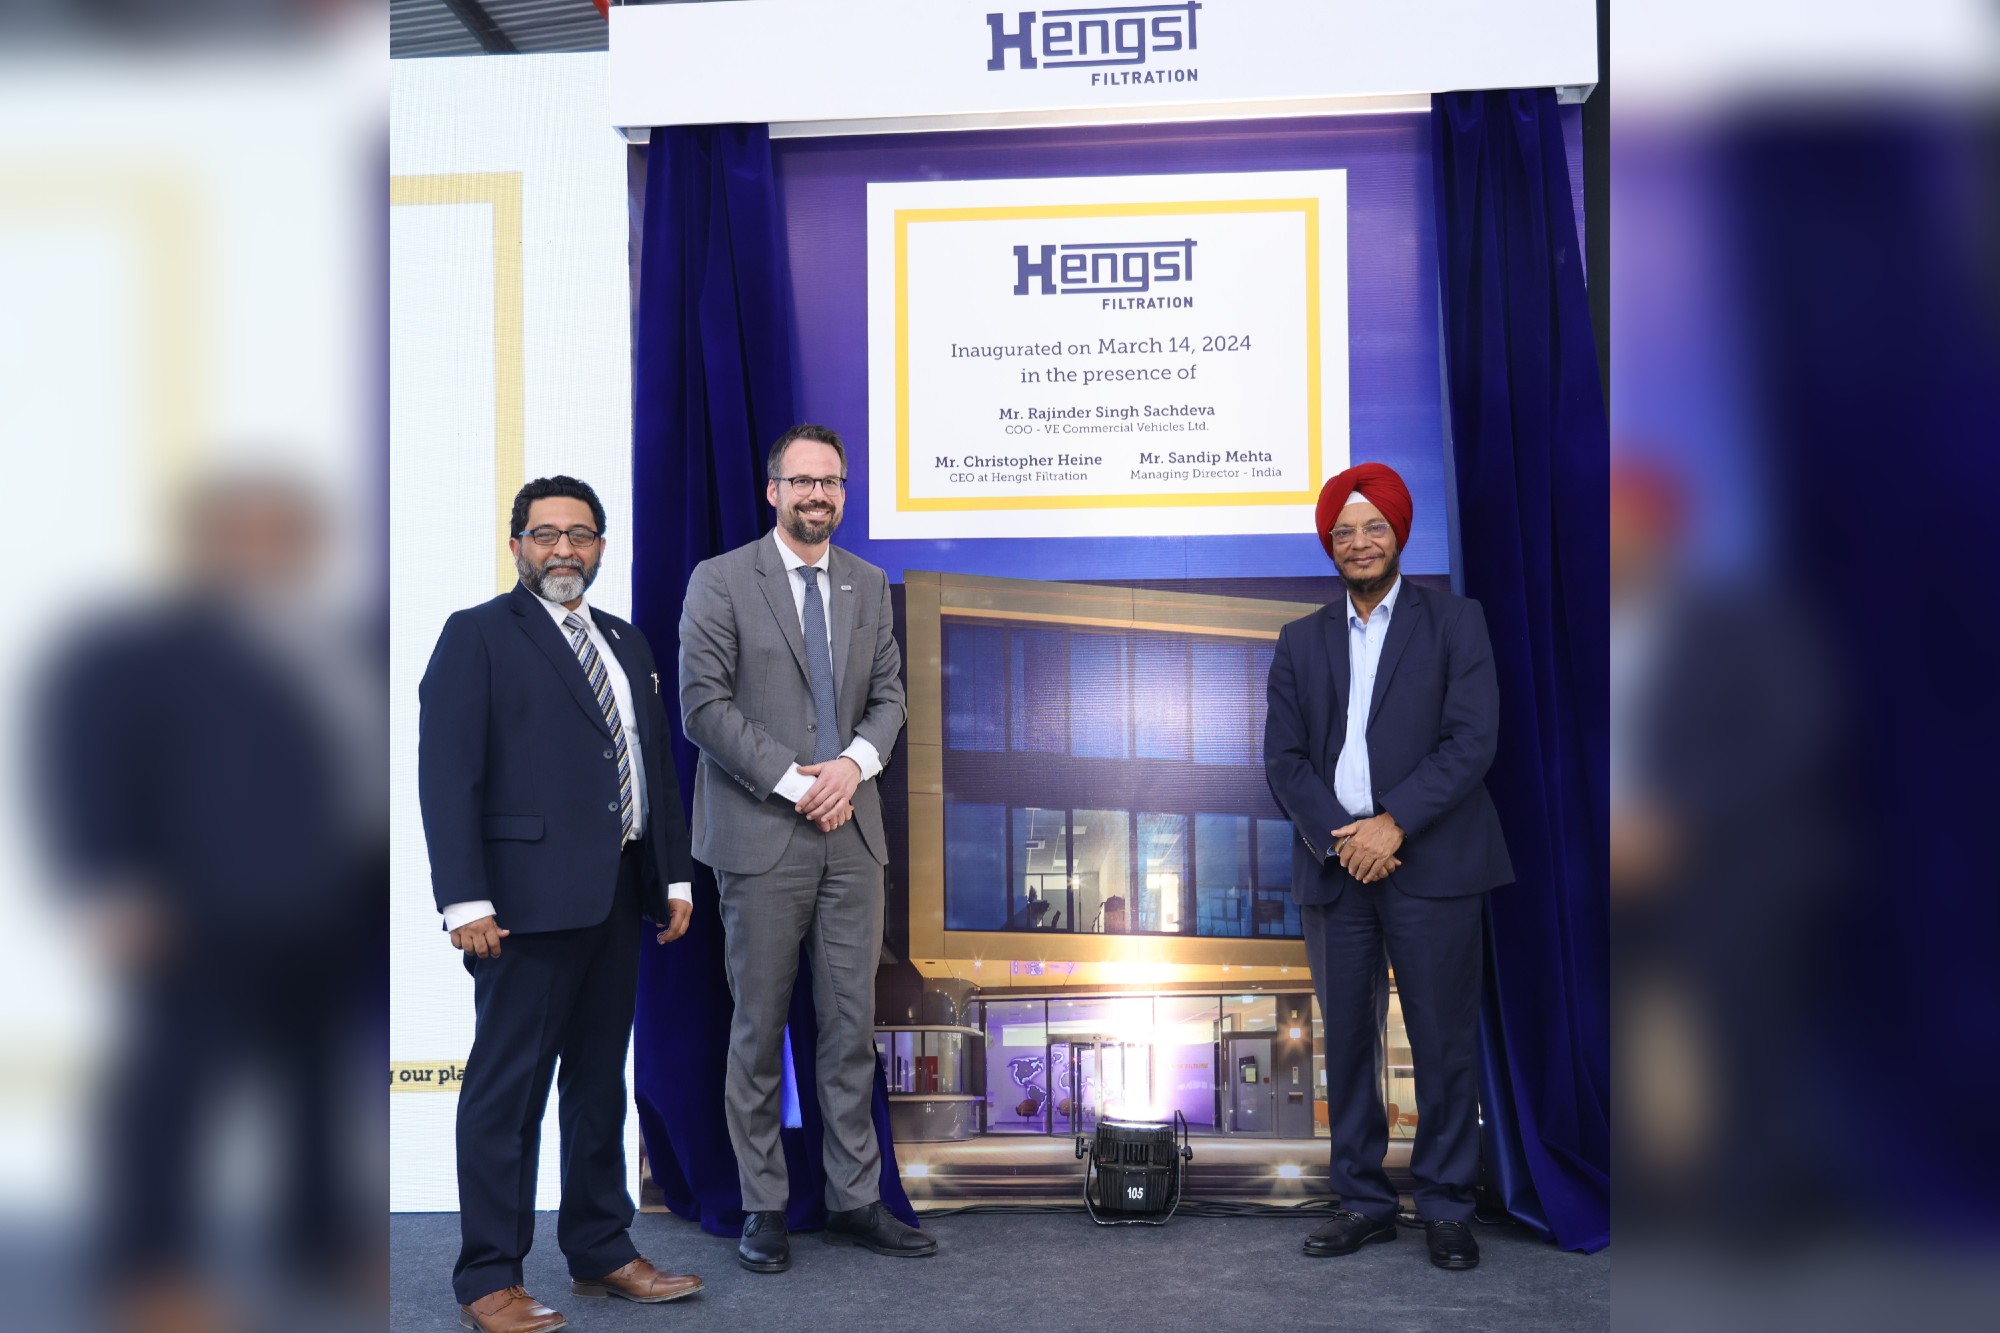 Hengst Filtration unveils state-of-the-art facility in Bengaluru